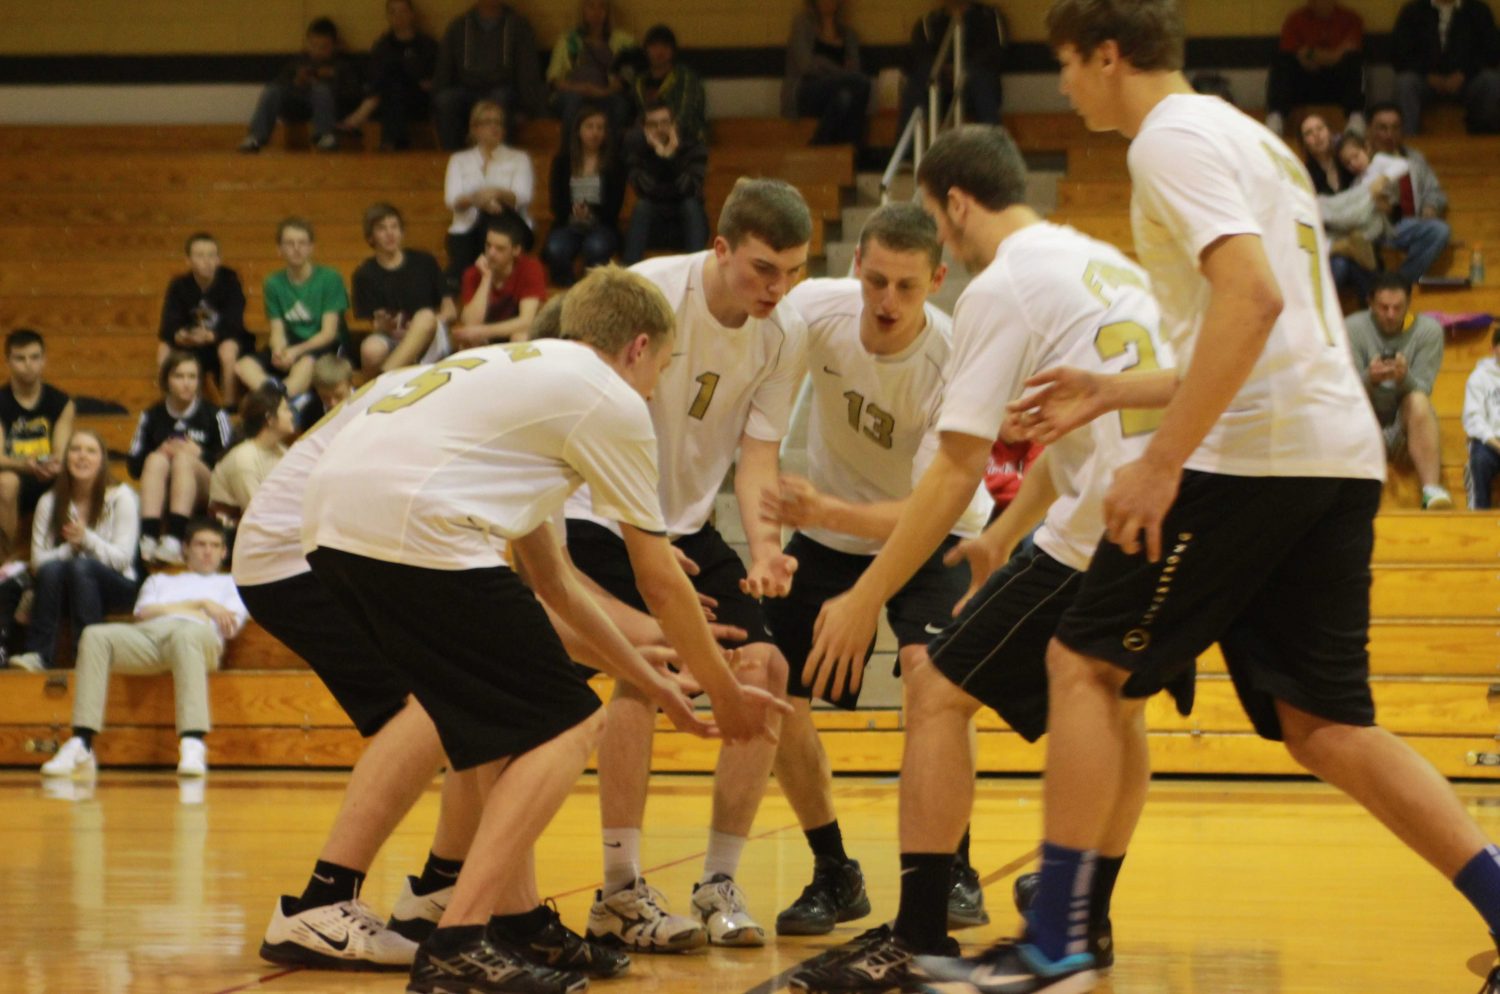 The Boys Varsity Volleyball team join together before their game on Tuesday, April 2. North took home a win against St. Dominic. Photo by Murphy Riley.